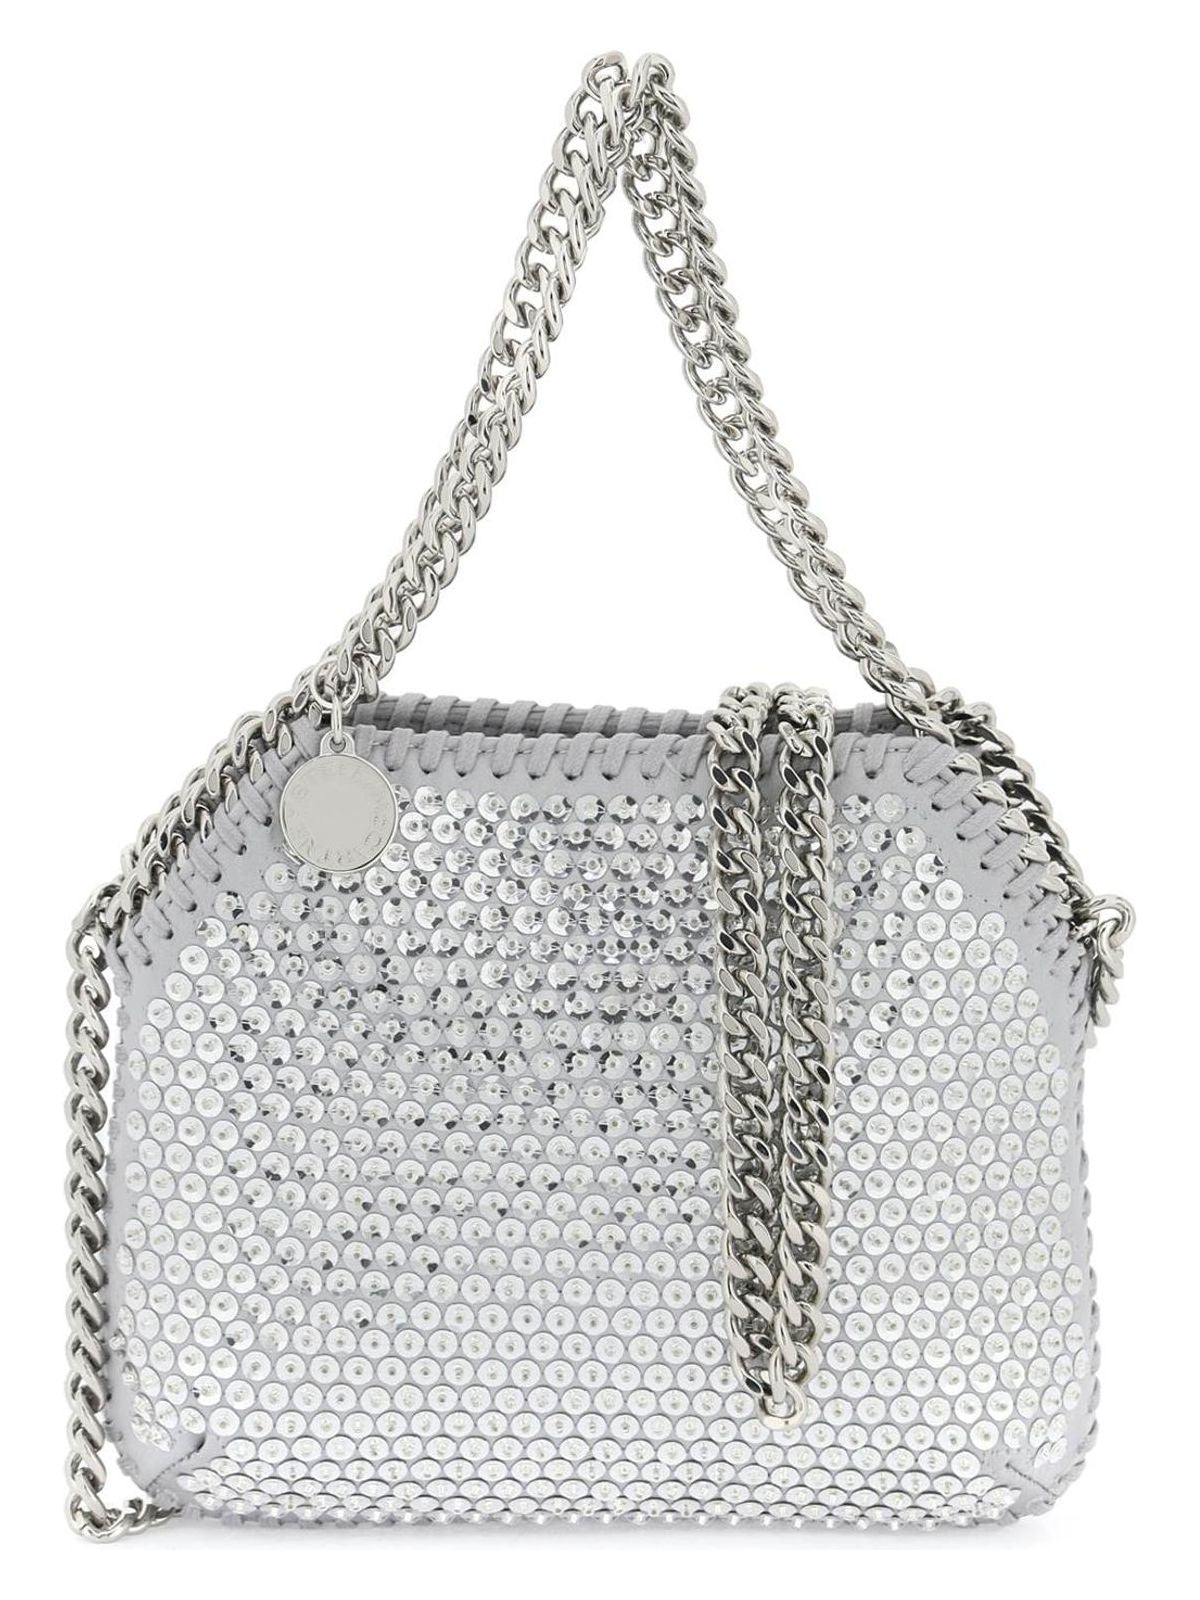 8101 STELLA MCCARTNEY  FALABELLA BAG WITH SEQUINS